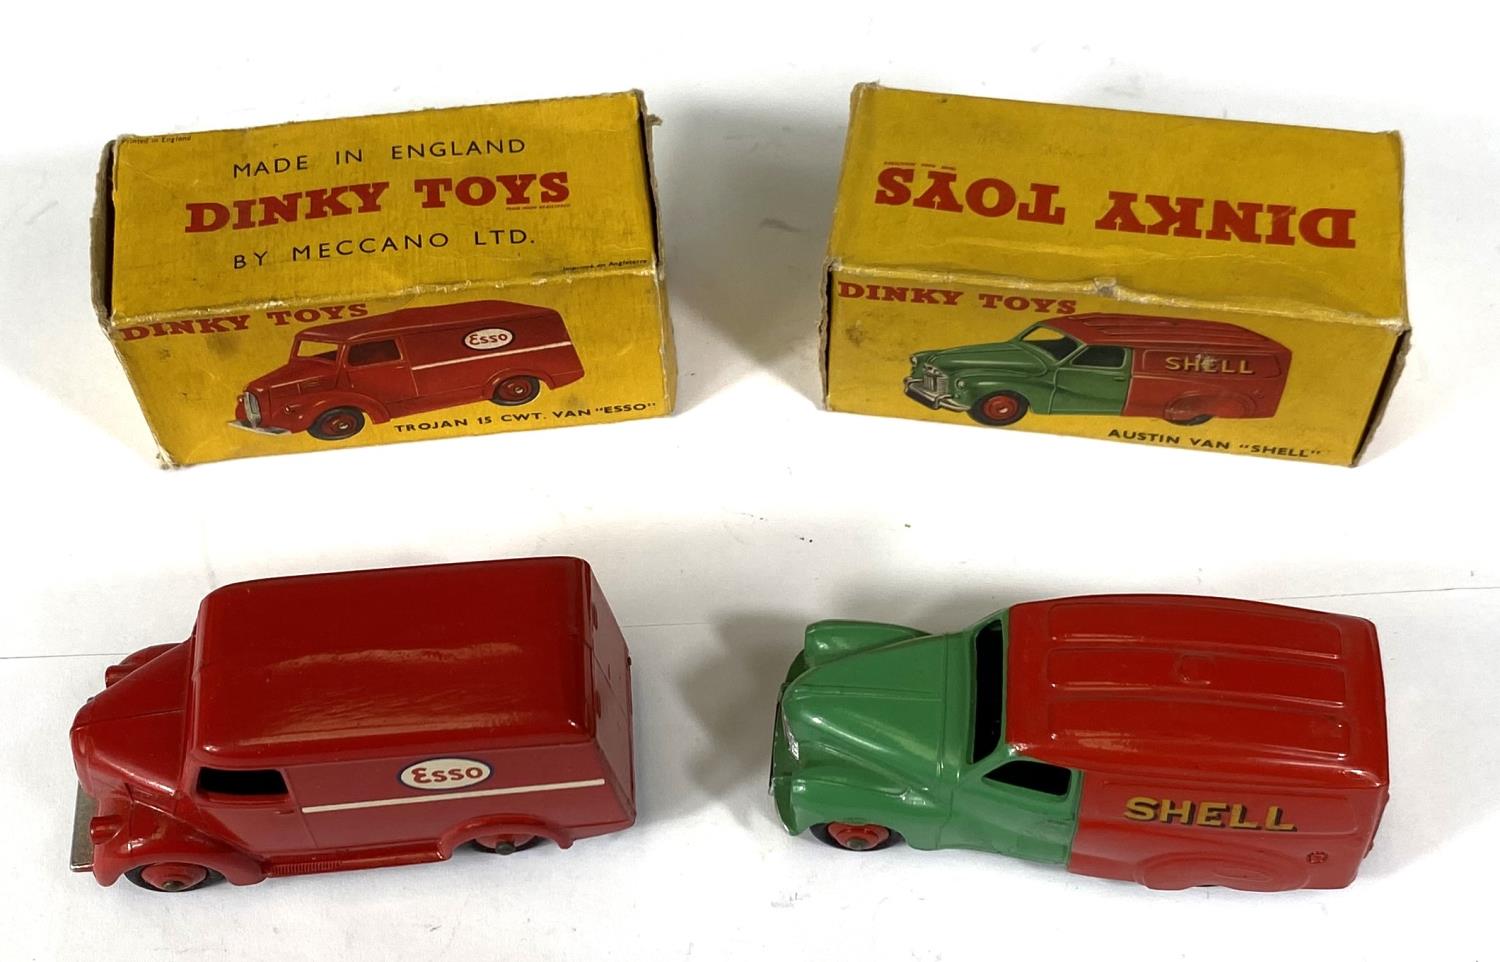 DINKY TOYS: 450 Trojan 15 CWT Van "Esso" red body and hubcaps in original box (complete box but a - Image 2 of 5